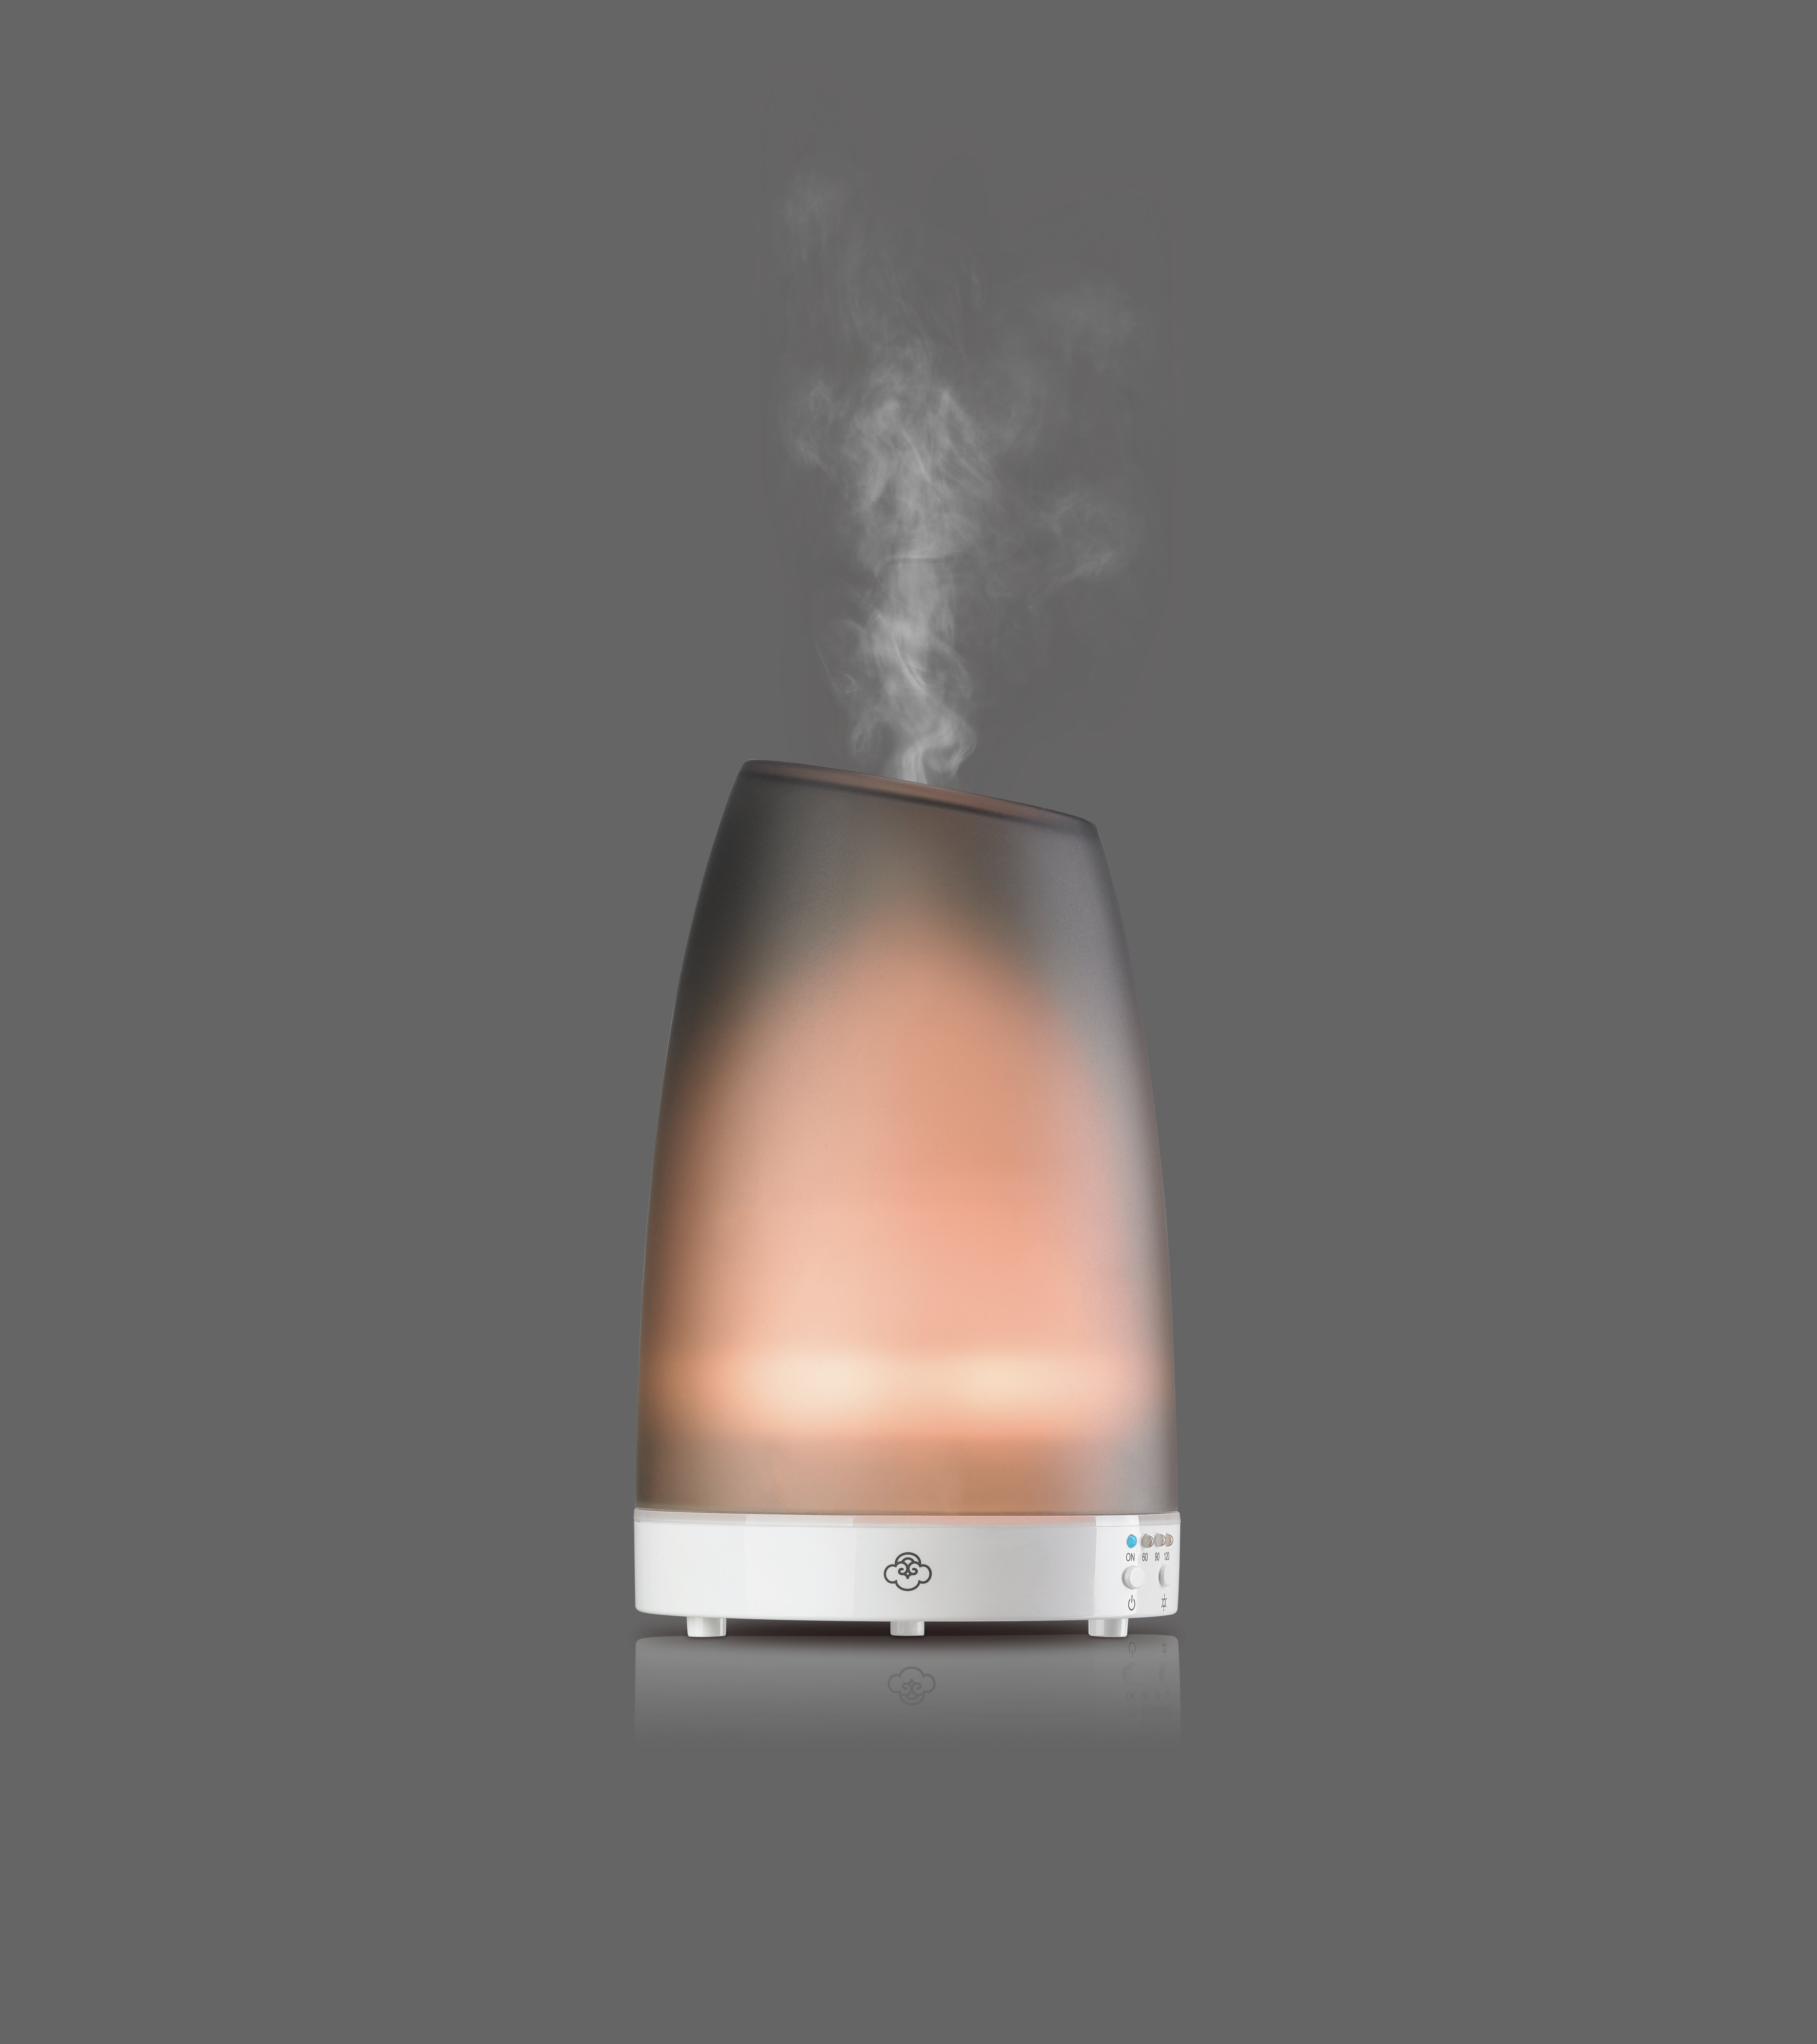 SERENE HOUSE Plug-in Essential Oil Diffusers